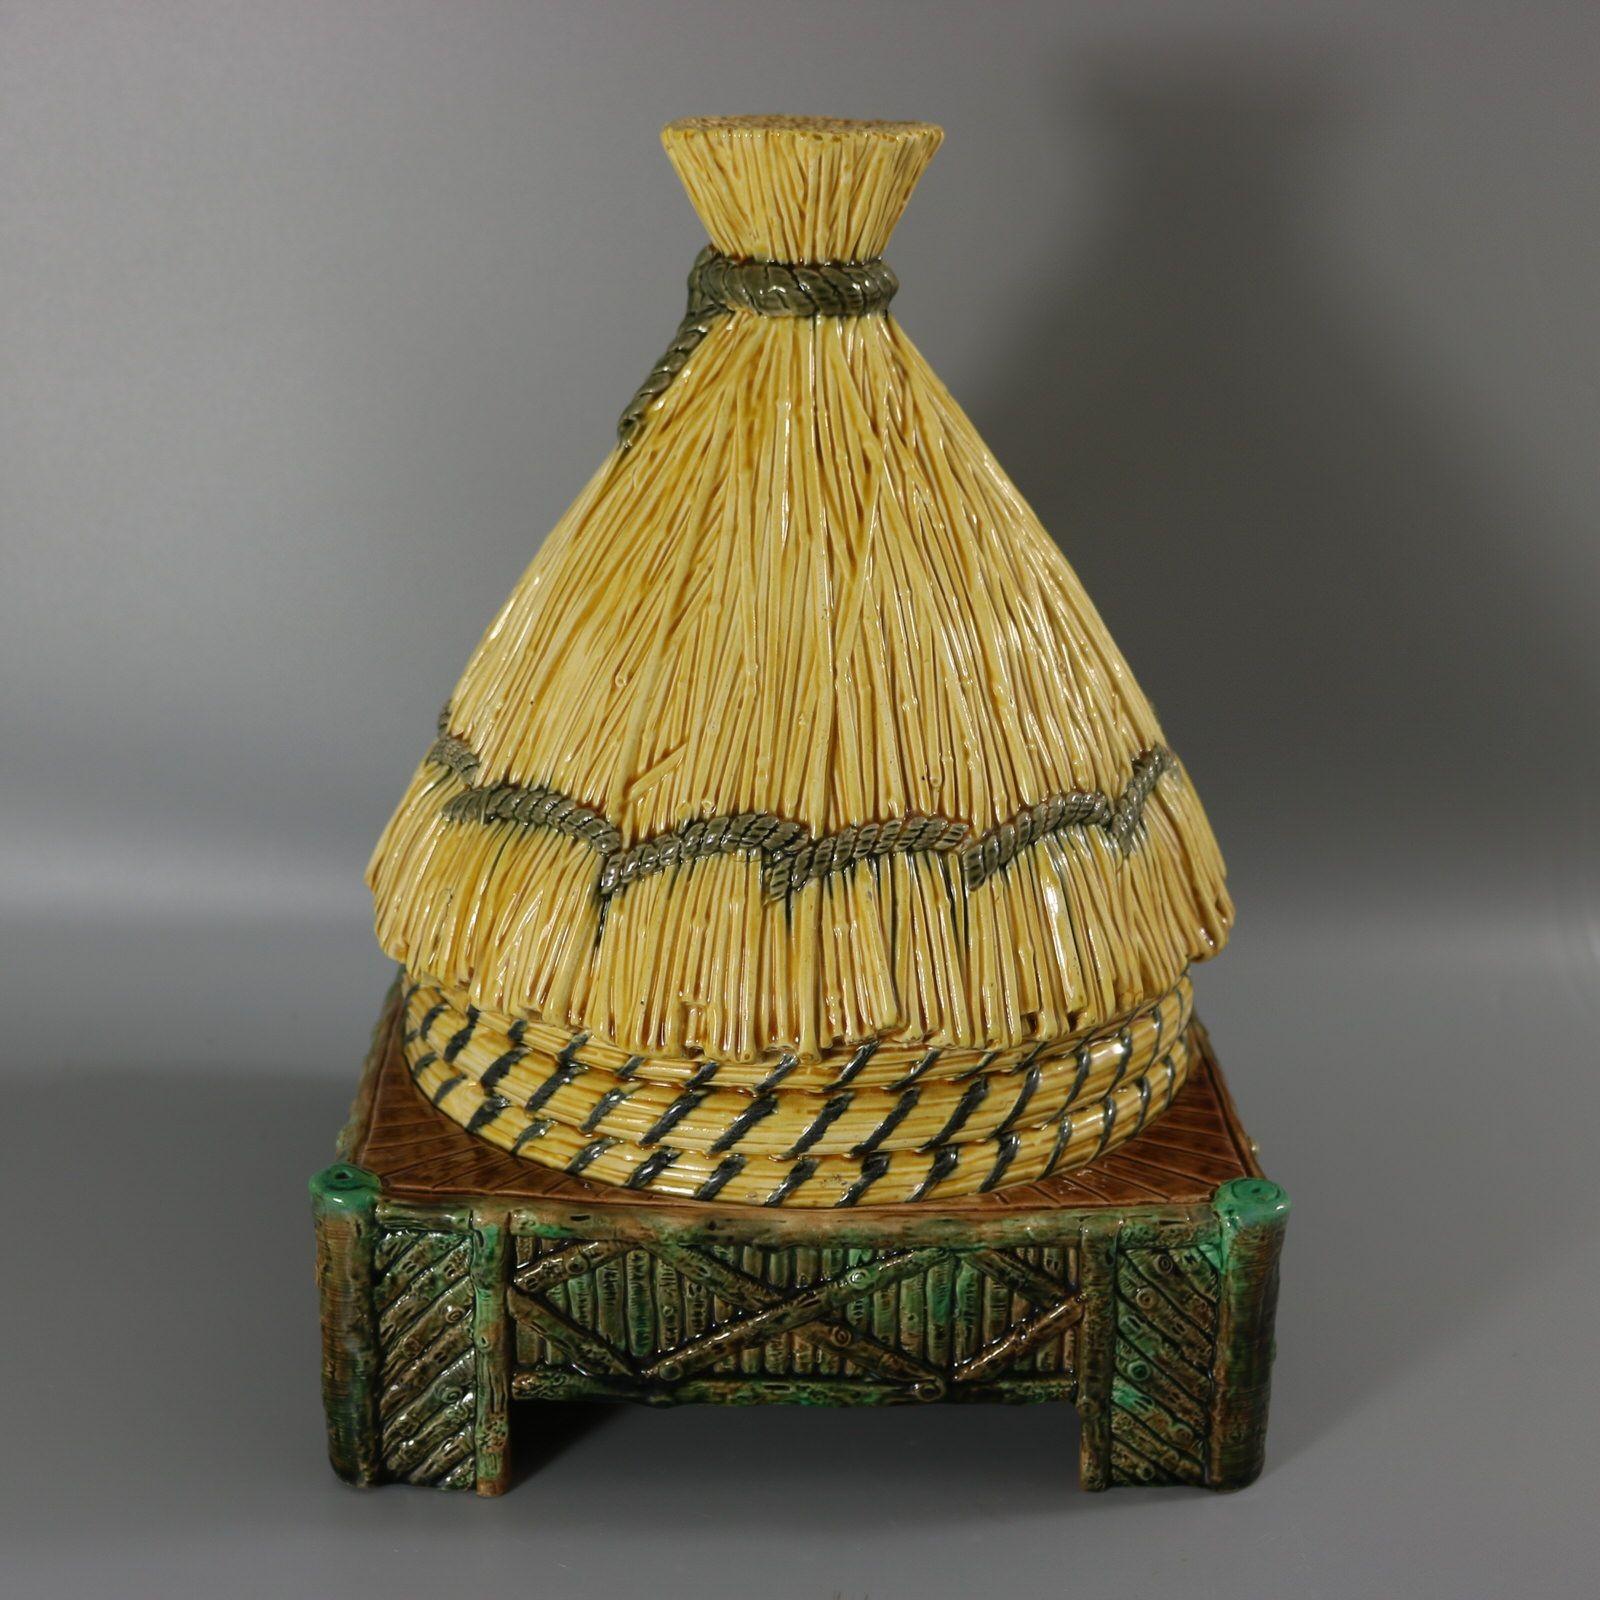 English George Jones Thatched Beehive Cheese Keeper For Sale